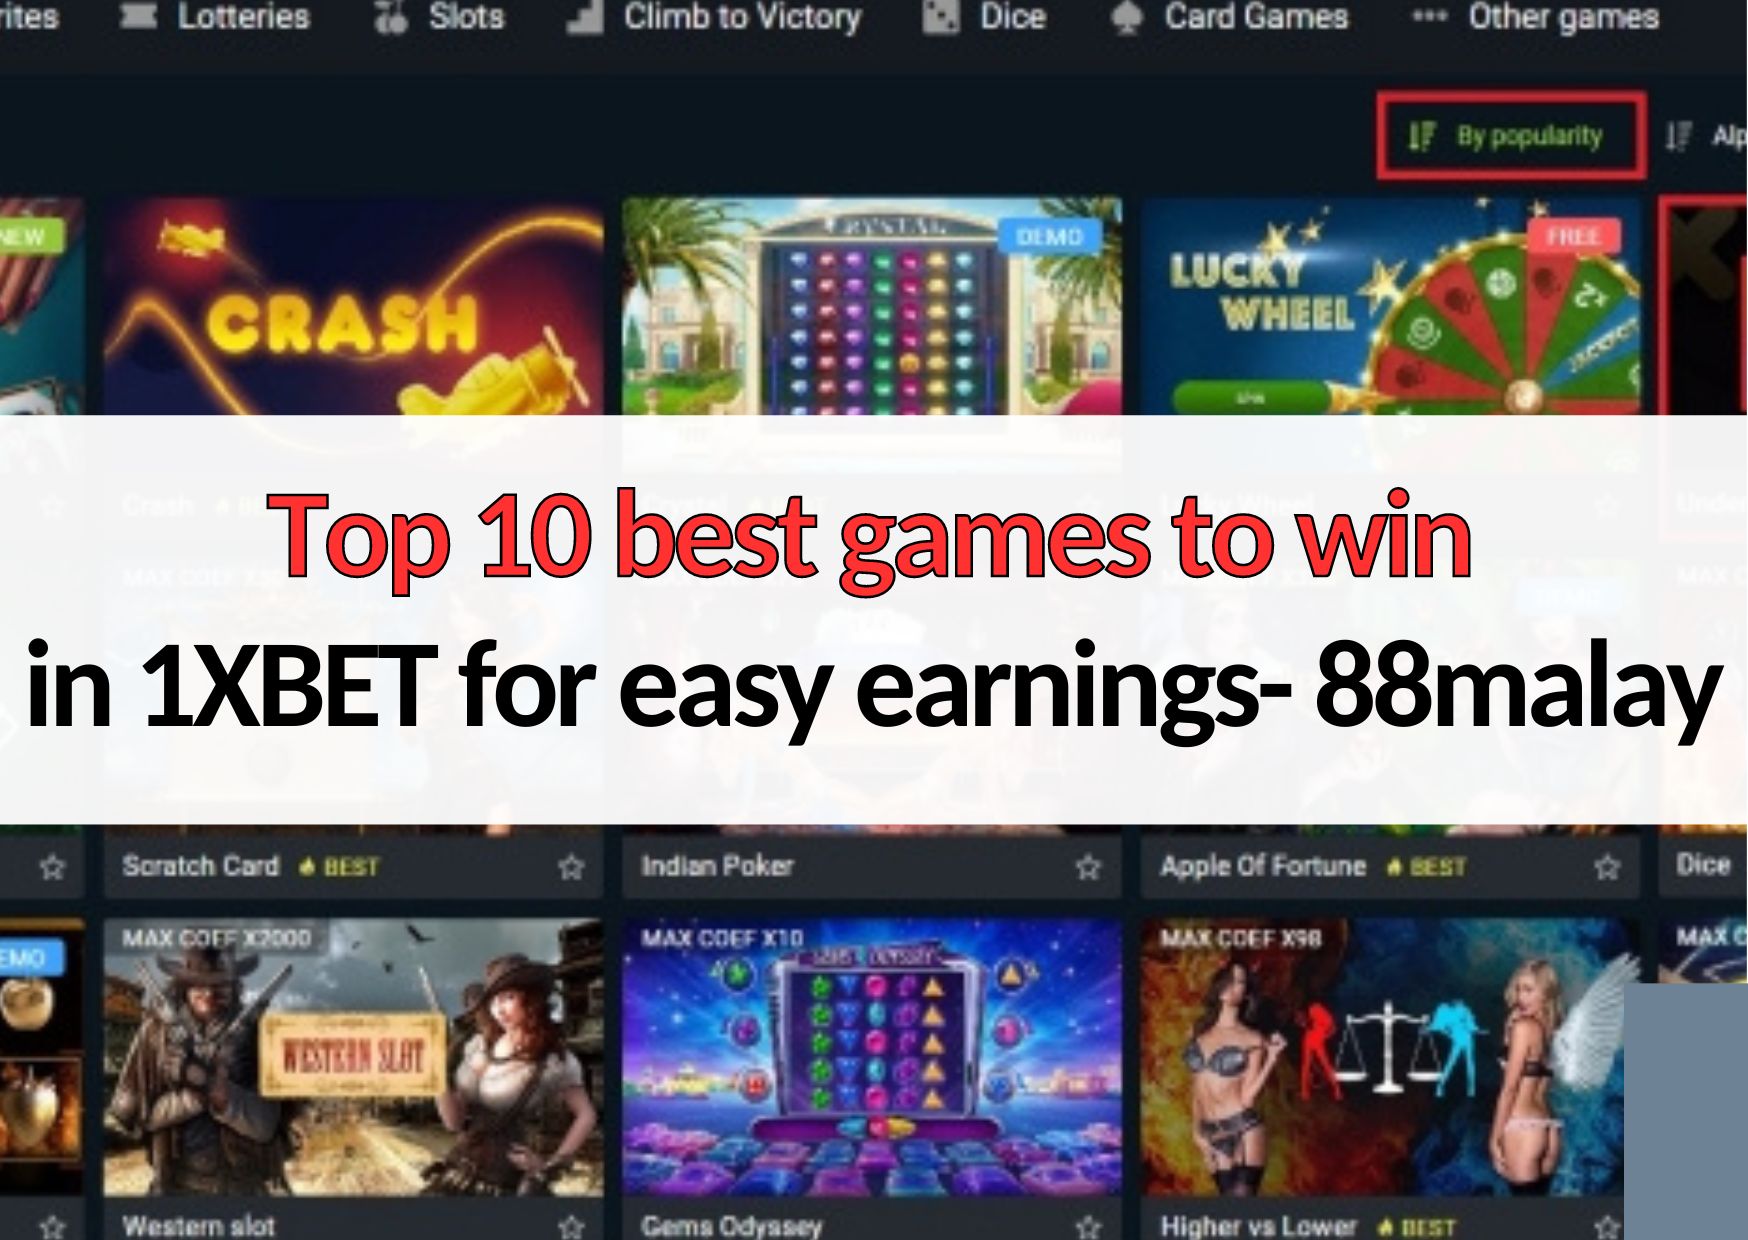 88malay top 10 best game to win in 1xbet